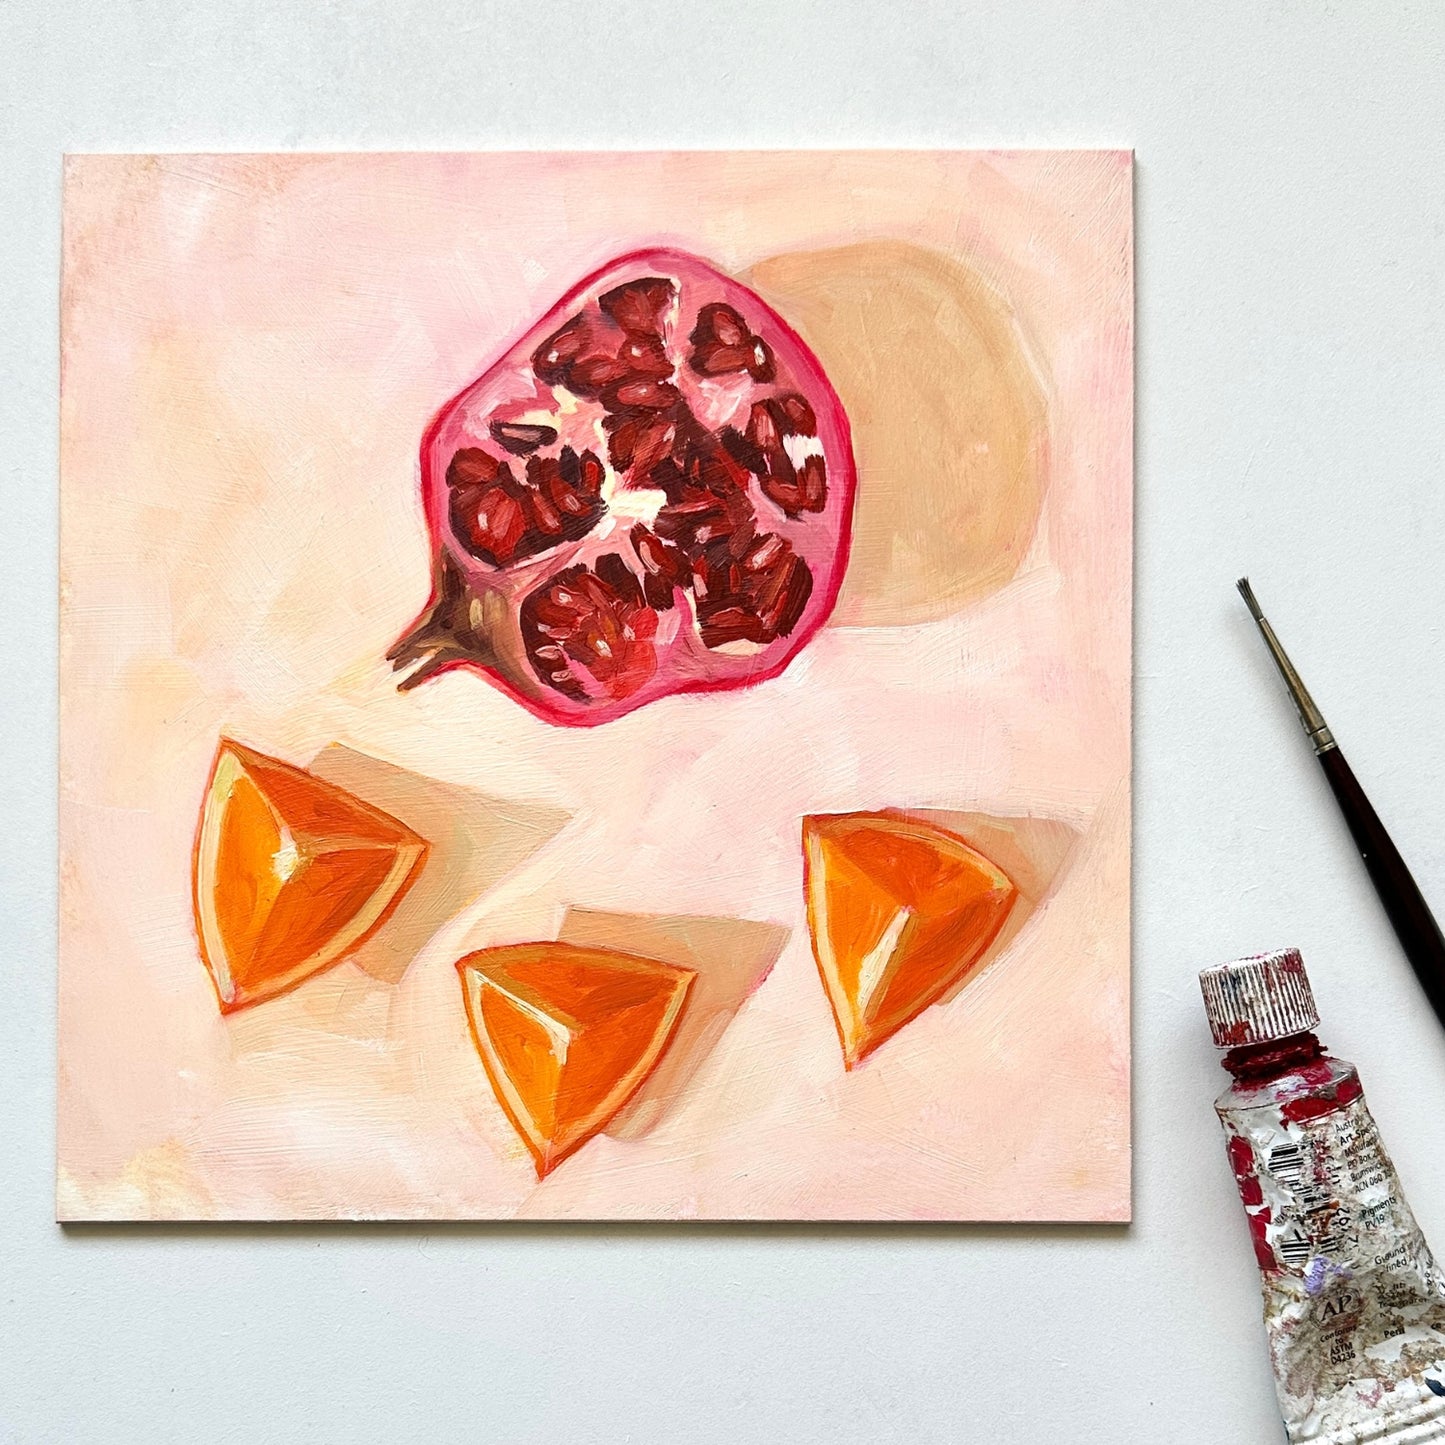 lifestyle photo impressionistic original oil painting of a still life setting of pomegranate fruit and three orange slices on a textured cream background with soft shadows. the painting is on a white desk and there is a paintbrush and oil paint tube next to it